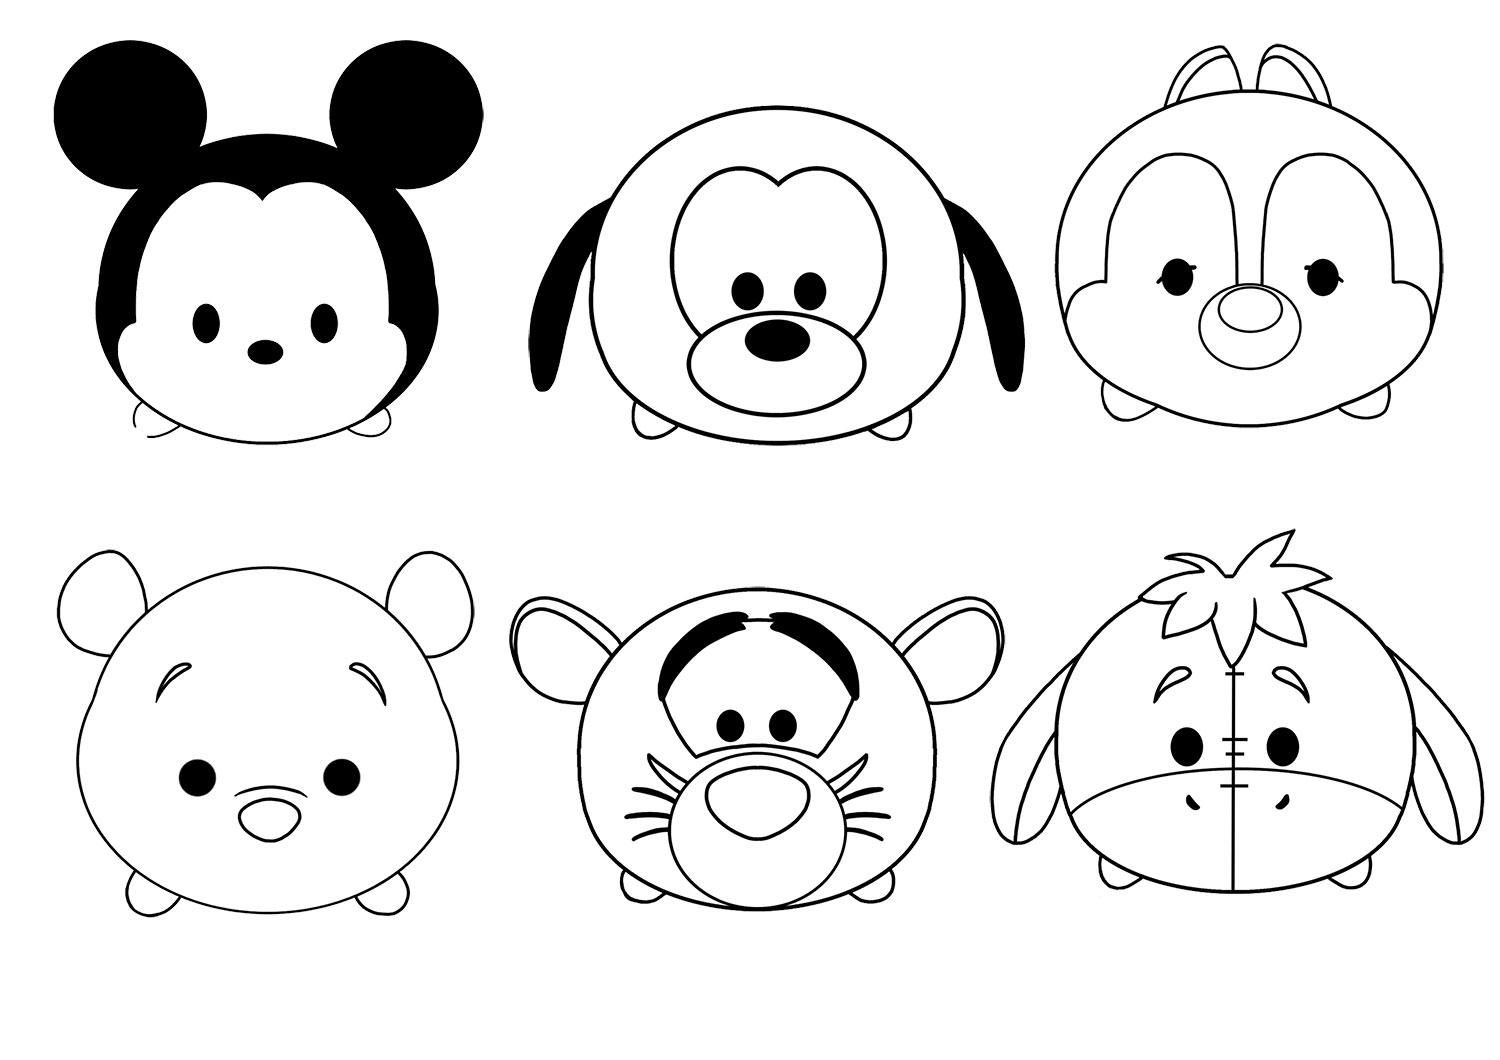 Tsum Tsum Coloring Pages - Best Coloring Pages For Kids